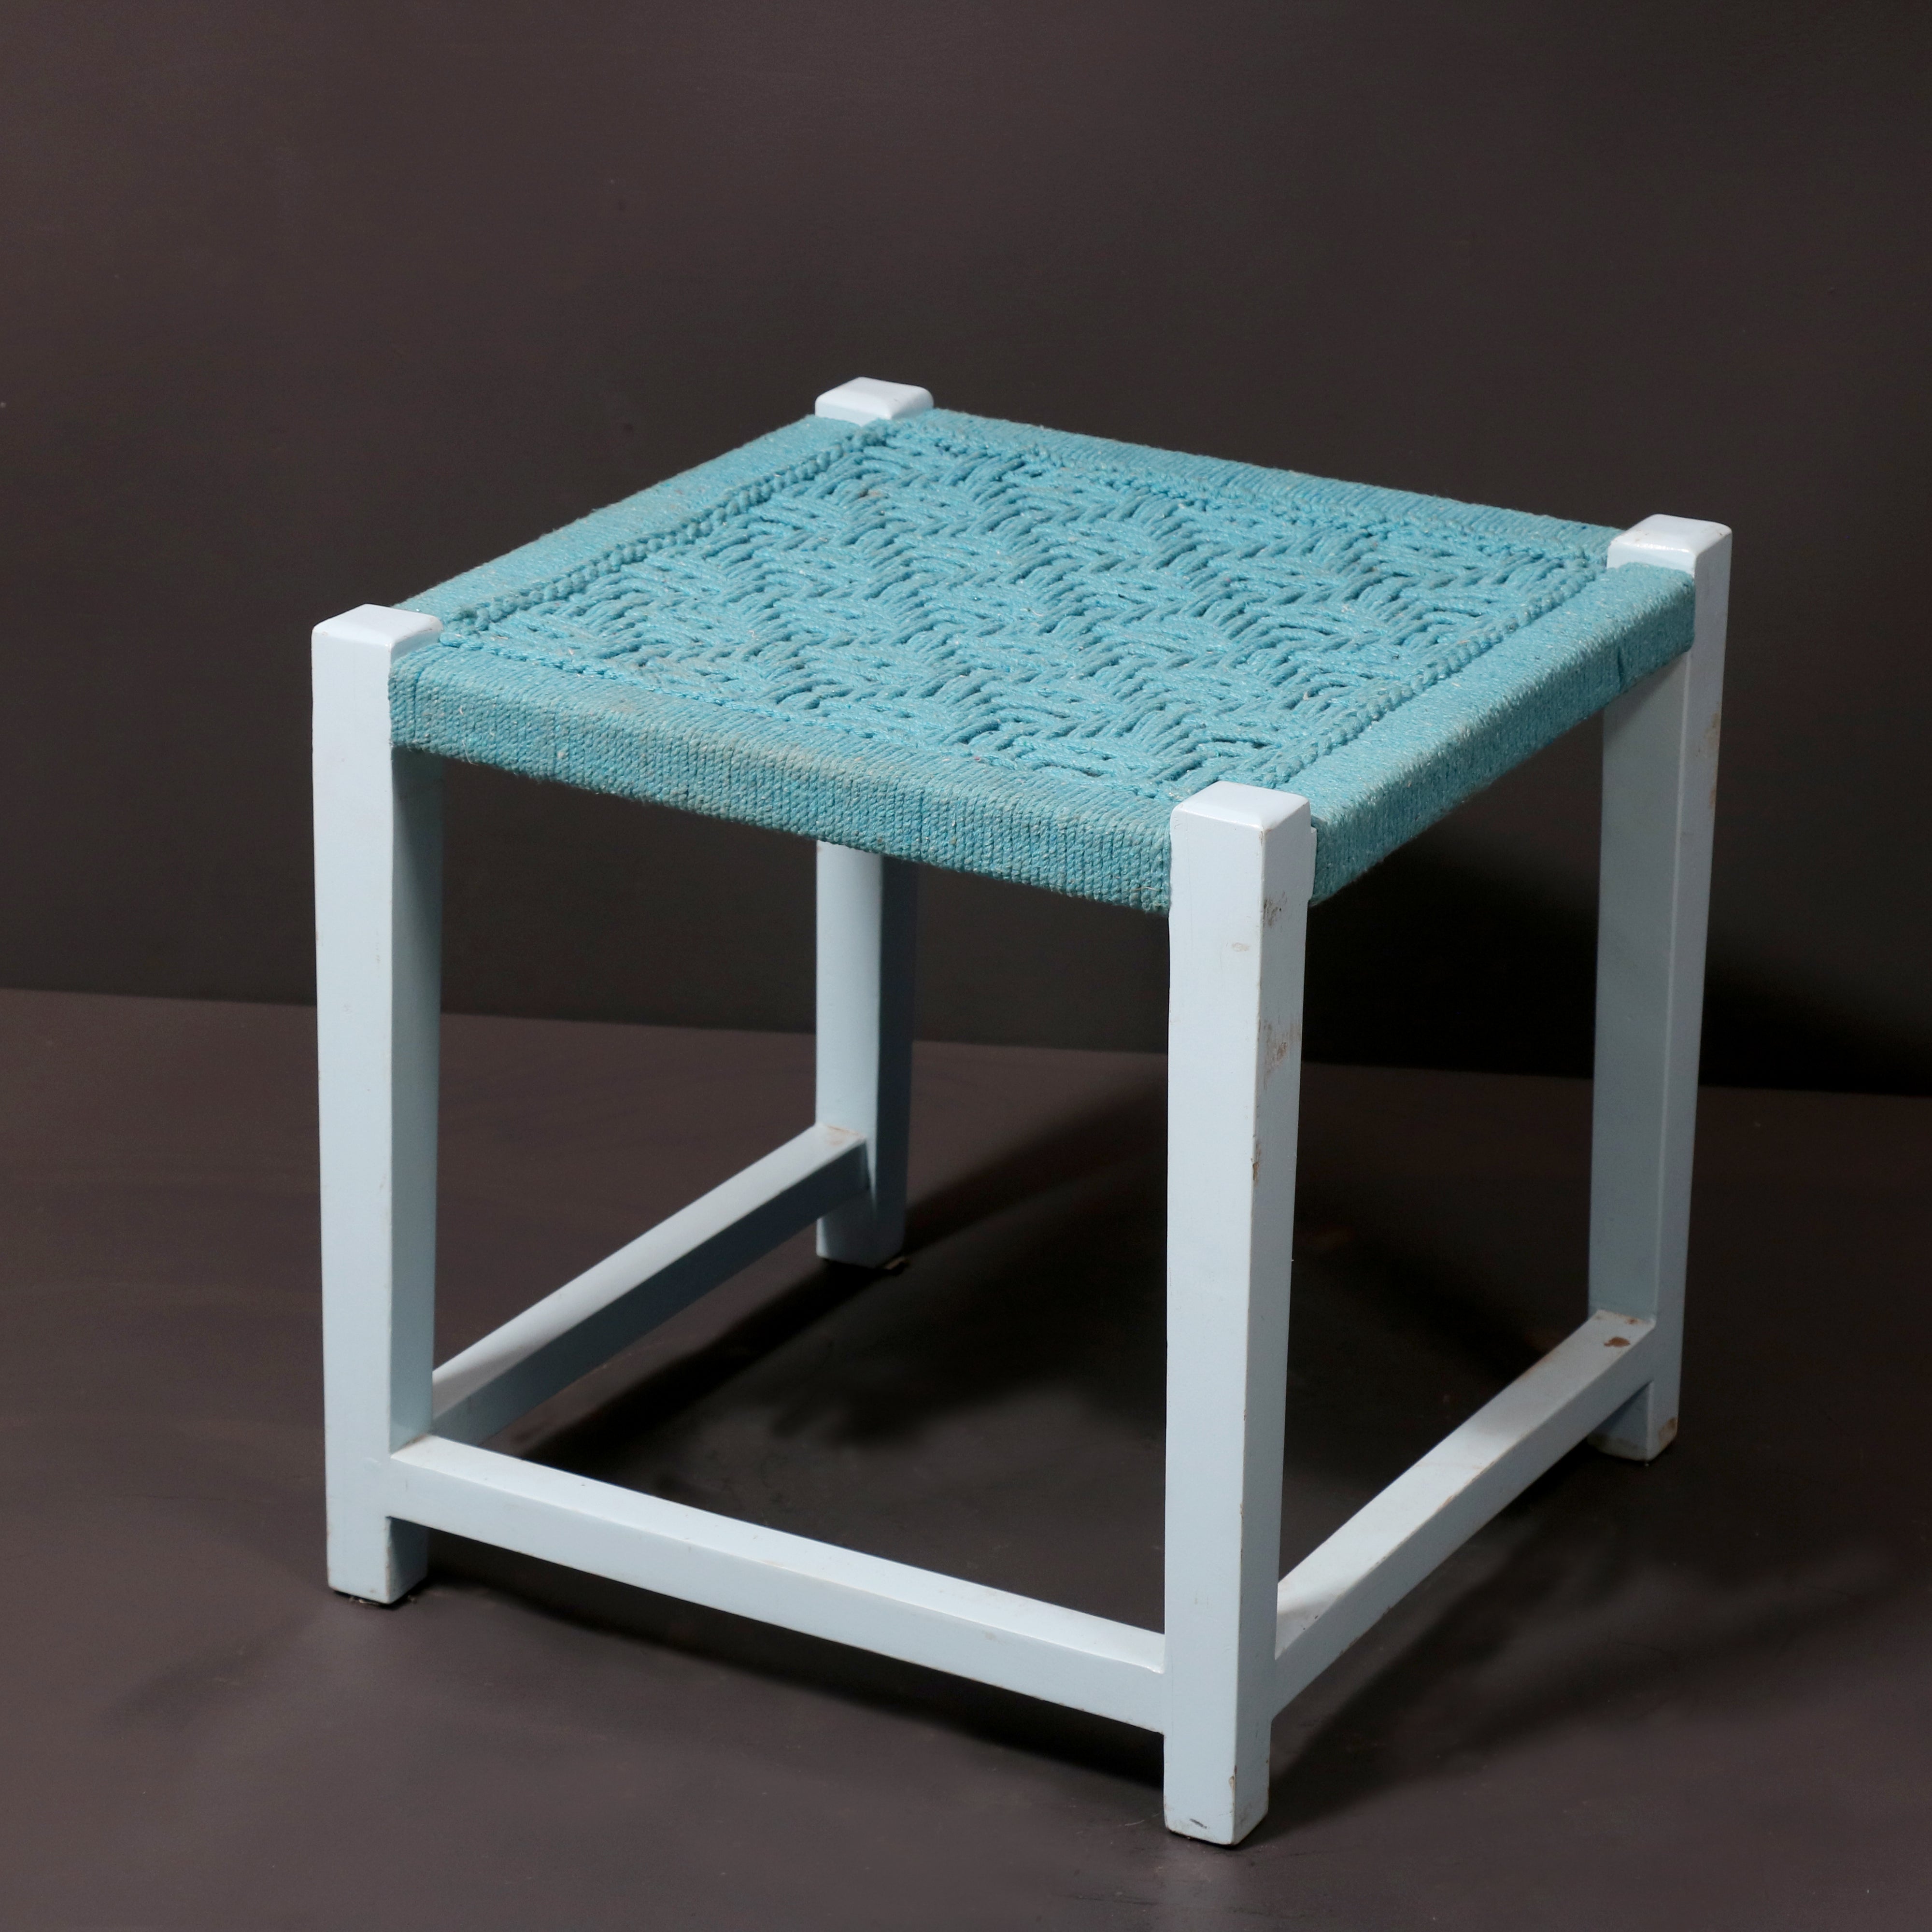 Teal and White Wooden Stool Stool